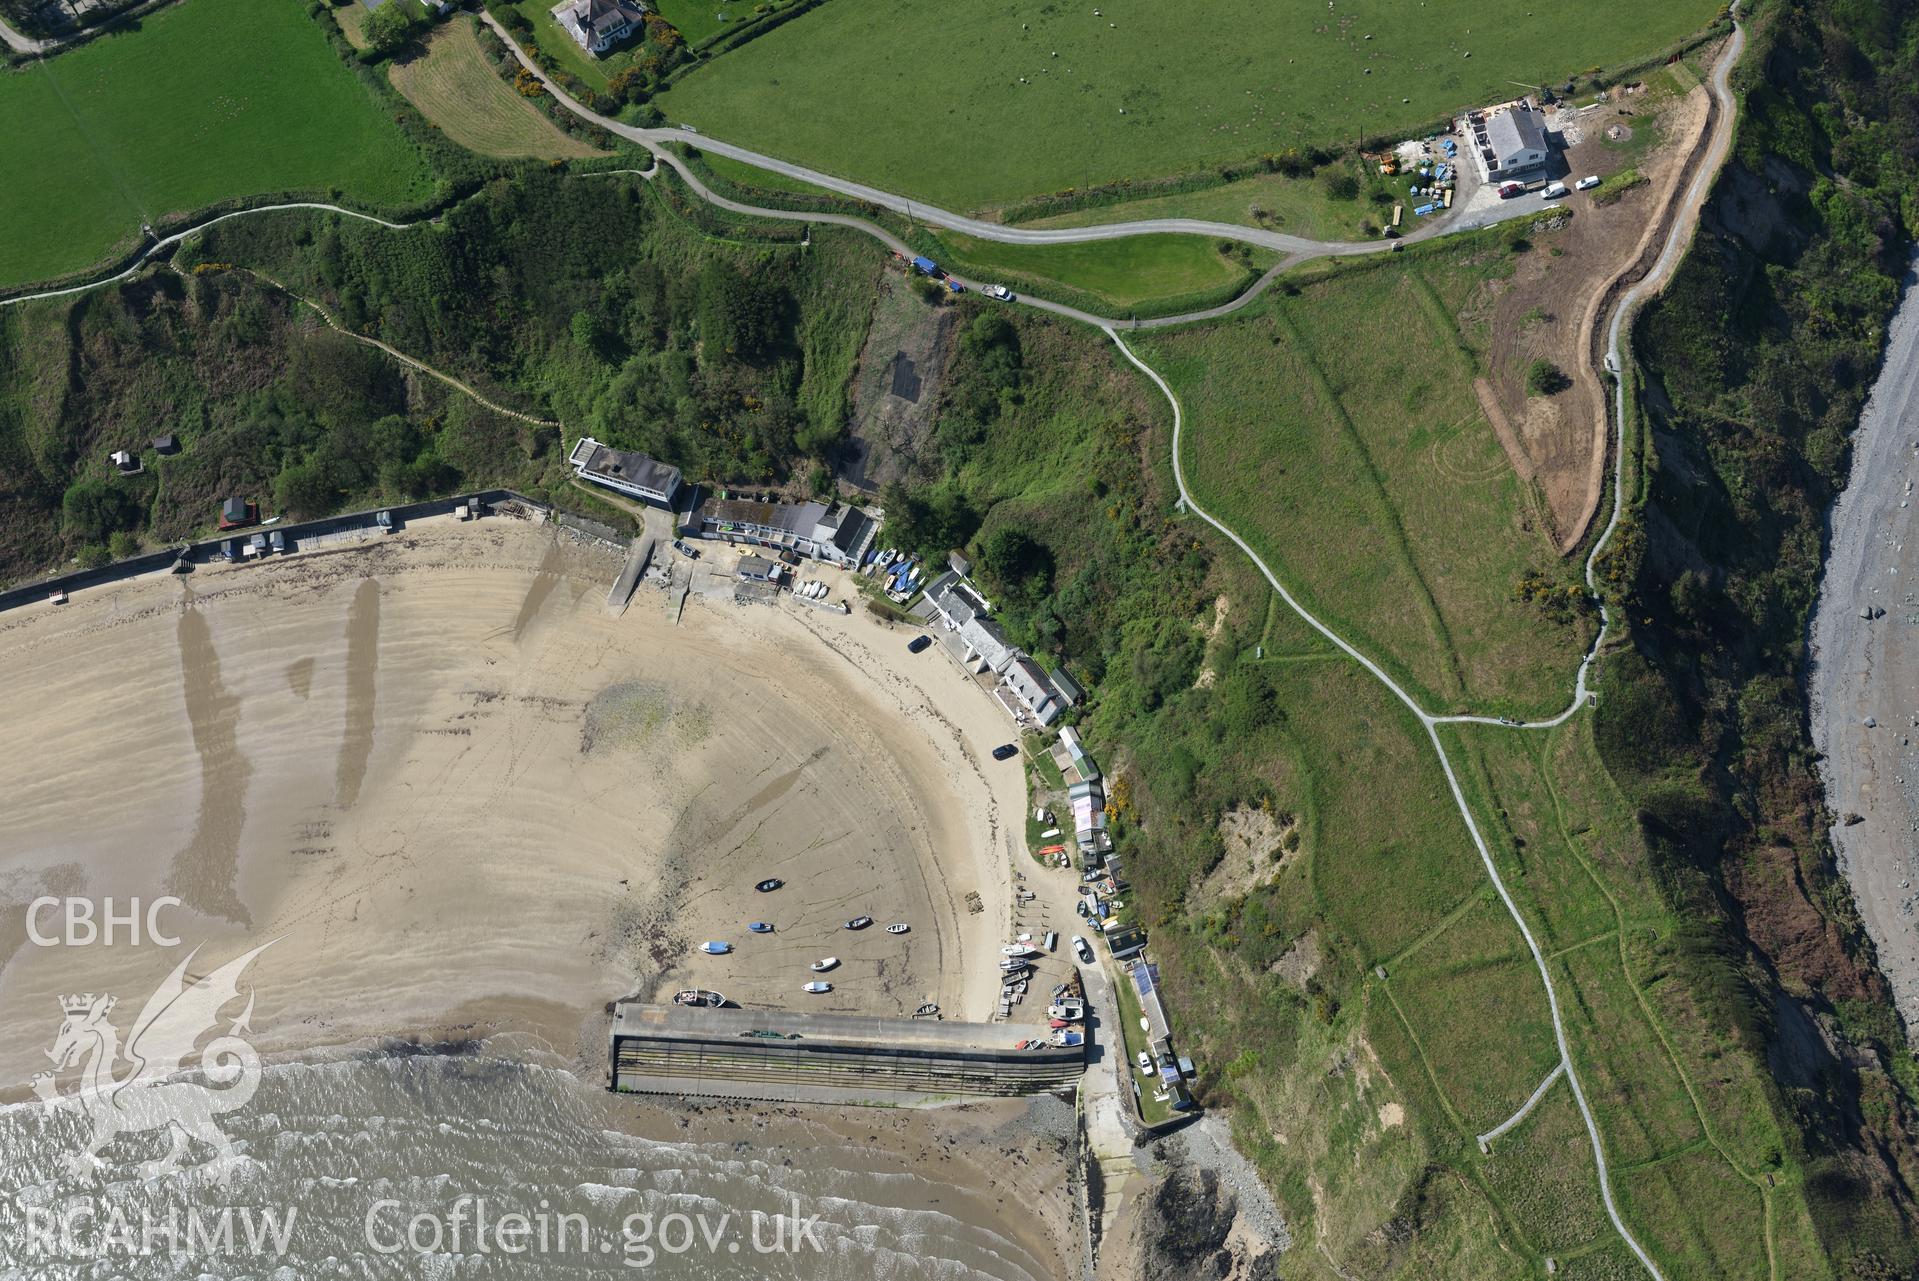 Aerial photography of Penrhyn Nefyn harbour taken on 3rd May 2017.  Baseline aerial reconnaissance survey for the CHERISH Project. ? Crown: CHERISH PROJECT 2017. Produced with EU funds through the Ireland Wales Co-operation Programme 2014-2020. All material made freely available through the Open Government Licence.